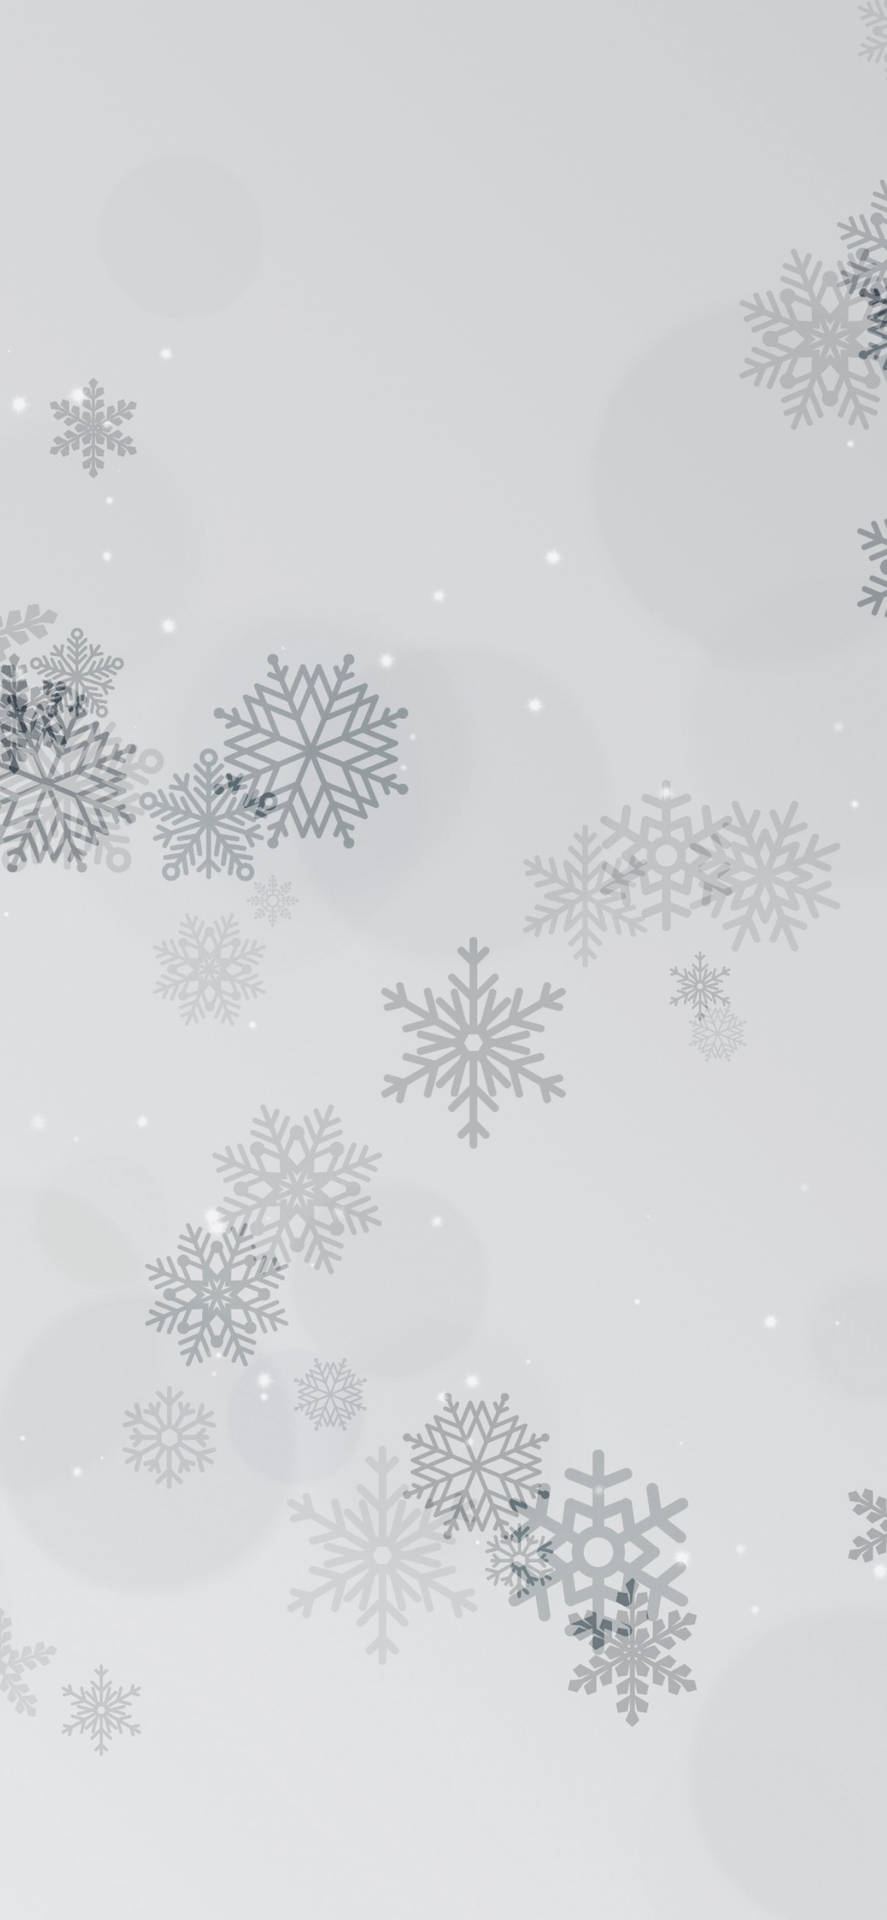 Get creative with Snowflake Iphone – view the world differently. Wallpaper